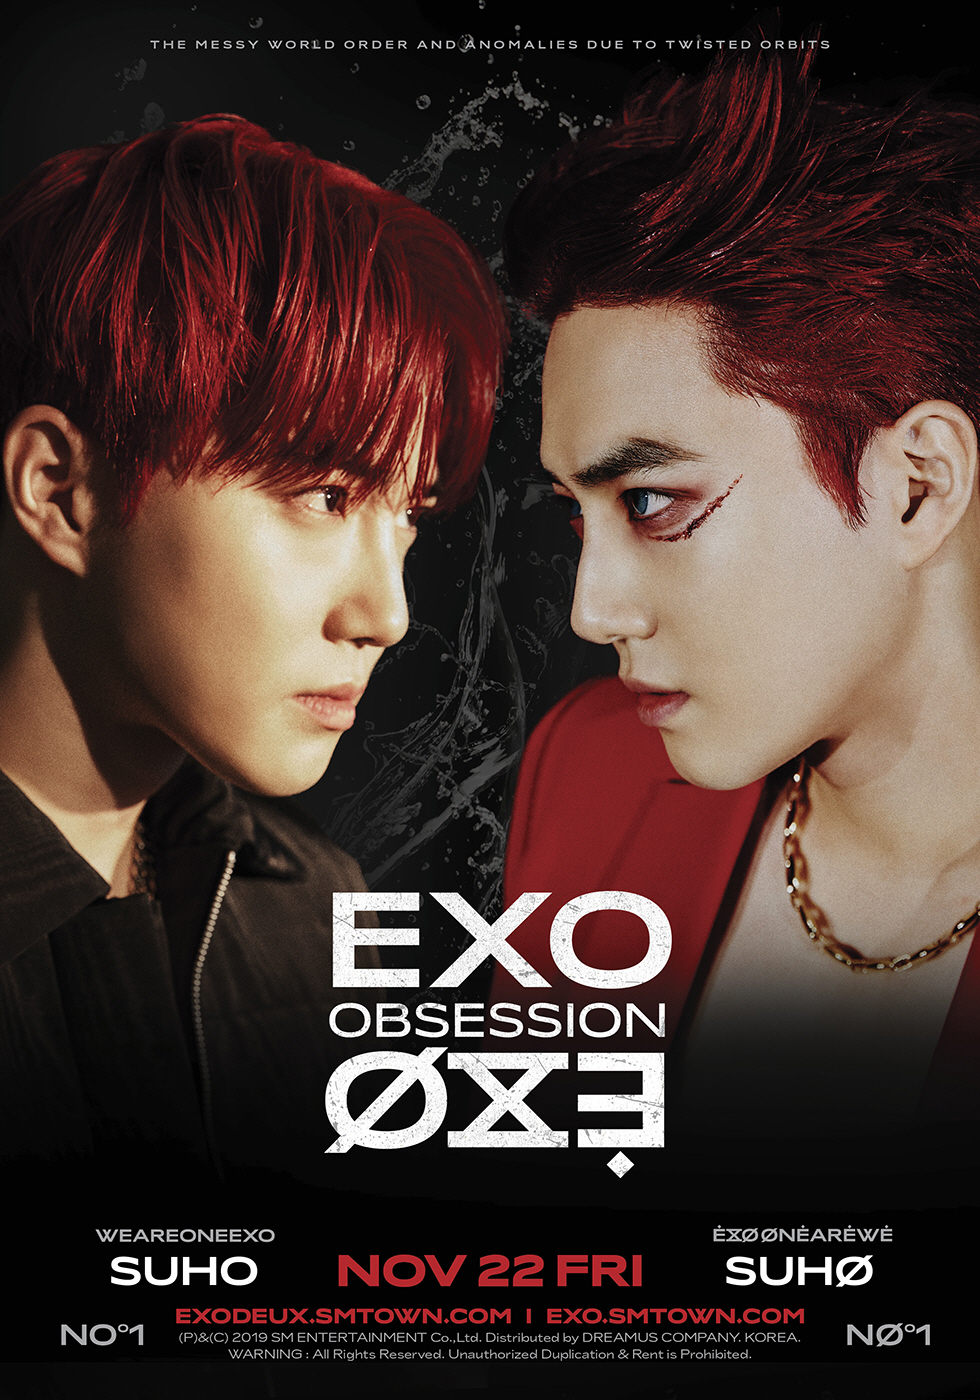 EXO (EXO) presents romantic sensibility with songs Baby You Are (Baby Yu-ah) and Non Stop (non-stop) from Regular 6th album.EXO Regular 6th album OBSESSION (Option), which will be released on the 27th, is enough to meet EXOs colorful music world with 10 songs including the title song Obsession Korean and Chinese version of addictive hip-hop dance genre.In addition, the song Baby You Are is a sophisticated dance pop song with folk elements. It can feel the excitement of the moment when it is at first sight to the opponent who met fatefully. Non Stop is a dance song with bright brass and guitar sound on funky rhythm.Also, through various SNS accounts of EXO and X-EXO at 0:00 today (22nd), the Teaser image of Suho, the last showdown runner of the promotion of #EXODEUX (#EXODUS), is opened, and EXO Suho, which shows overwhelming presence with only chic eyes, and X-EXO Suho, which shows mysterious charm with unconventional styling, can be seen. It has increased.On the other hand, EXO Regular 6th album OBSESSION will be released on November 27th at 6 pm on various music sites such as Melon, Flo, Genie, iTunes, Apple Music, Sporty Pie, QQ Music, Cougu Music and Couer Music.